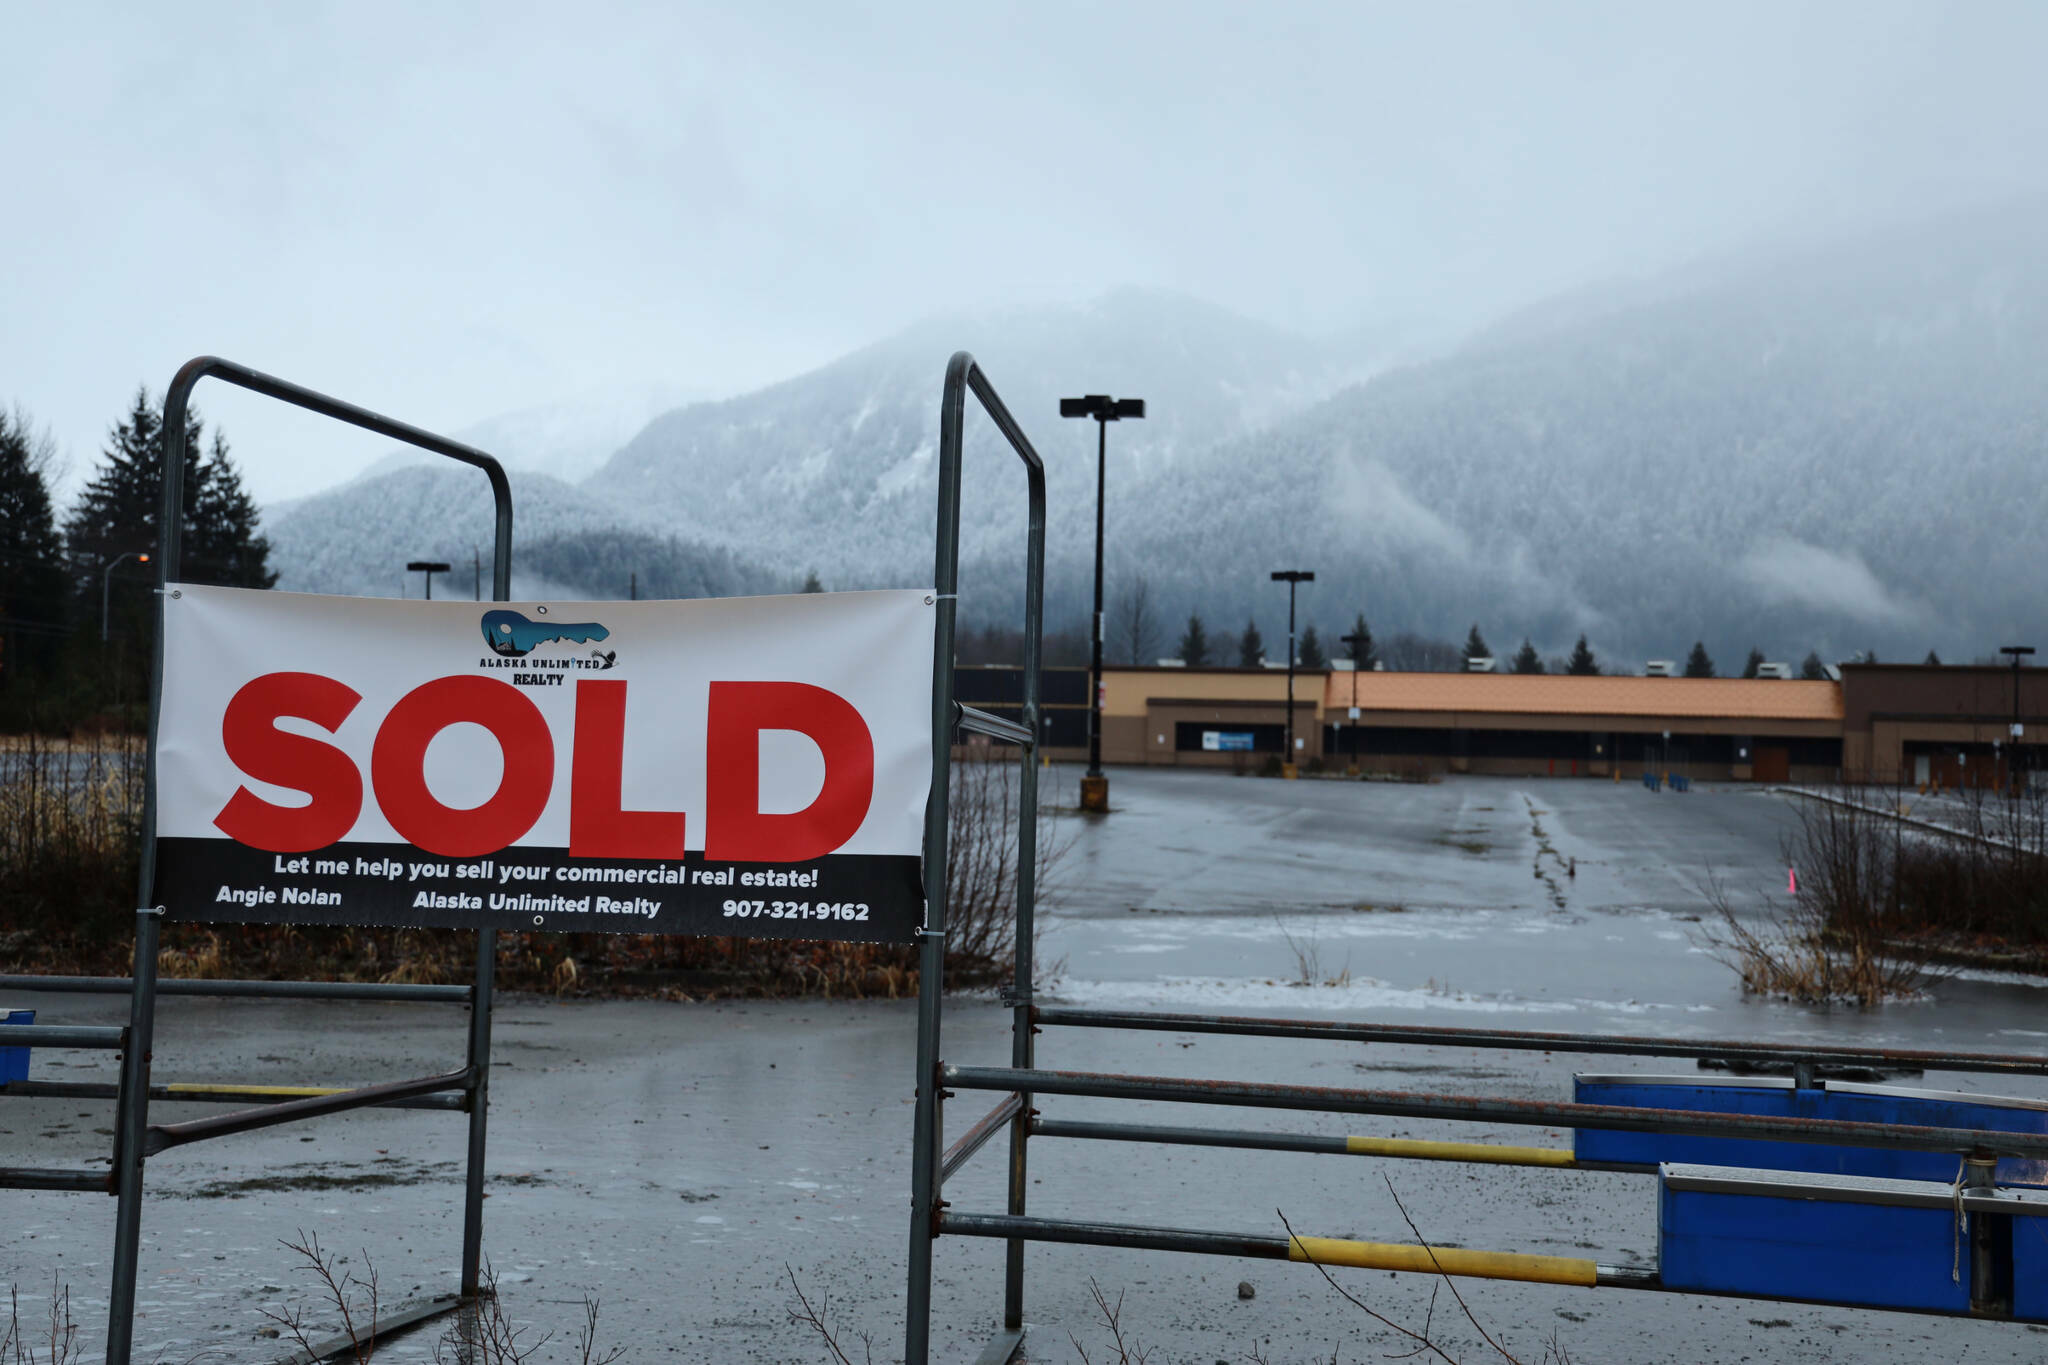 Clarise Larson / Juneau Empire File
A “sold” sign hangs outside the former Walmart building that was empty for many years until U-Haul purchased it late last year. A bill passed by the Senate on Tuesday would allow municipalities to impose tax penalties on blighted properties, while offering breaks for owners doing development projects.